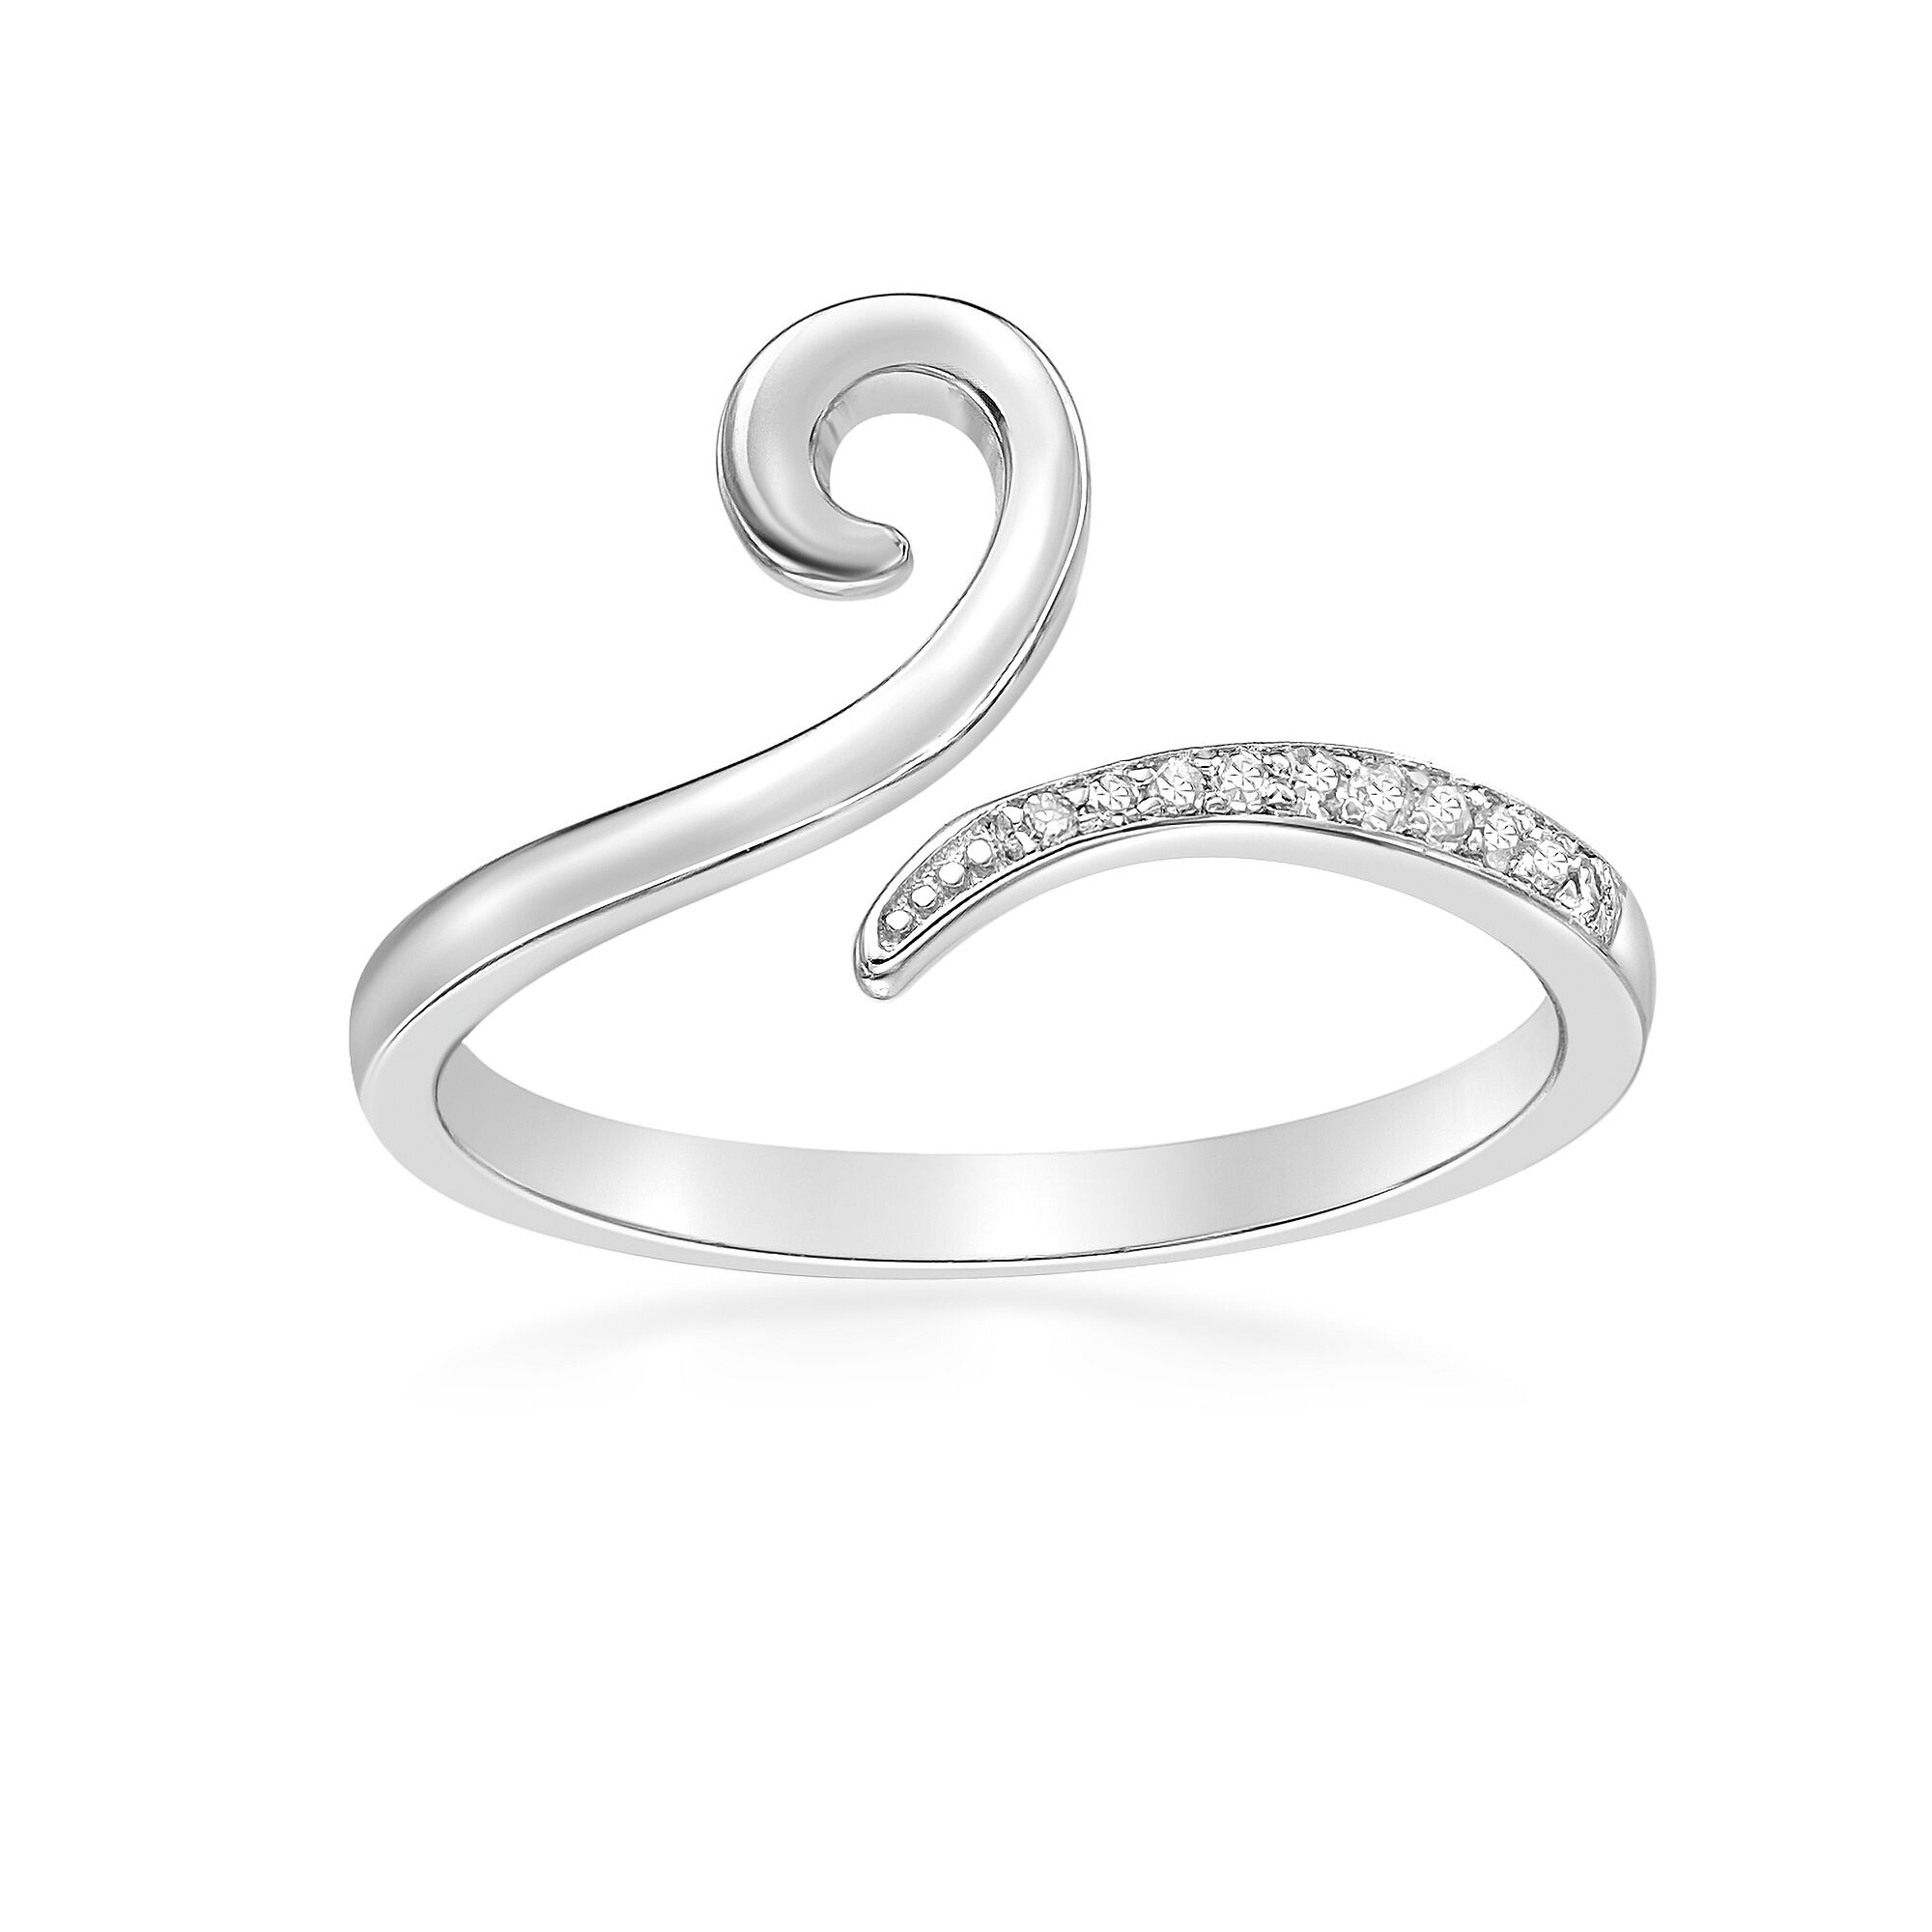 52525-toe-ring-default-collection-sterling-silver-52525.jpg